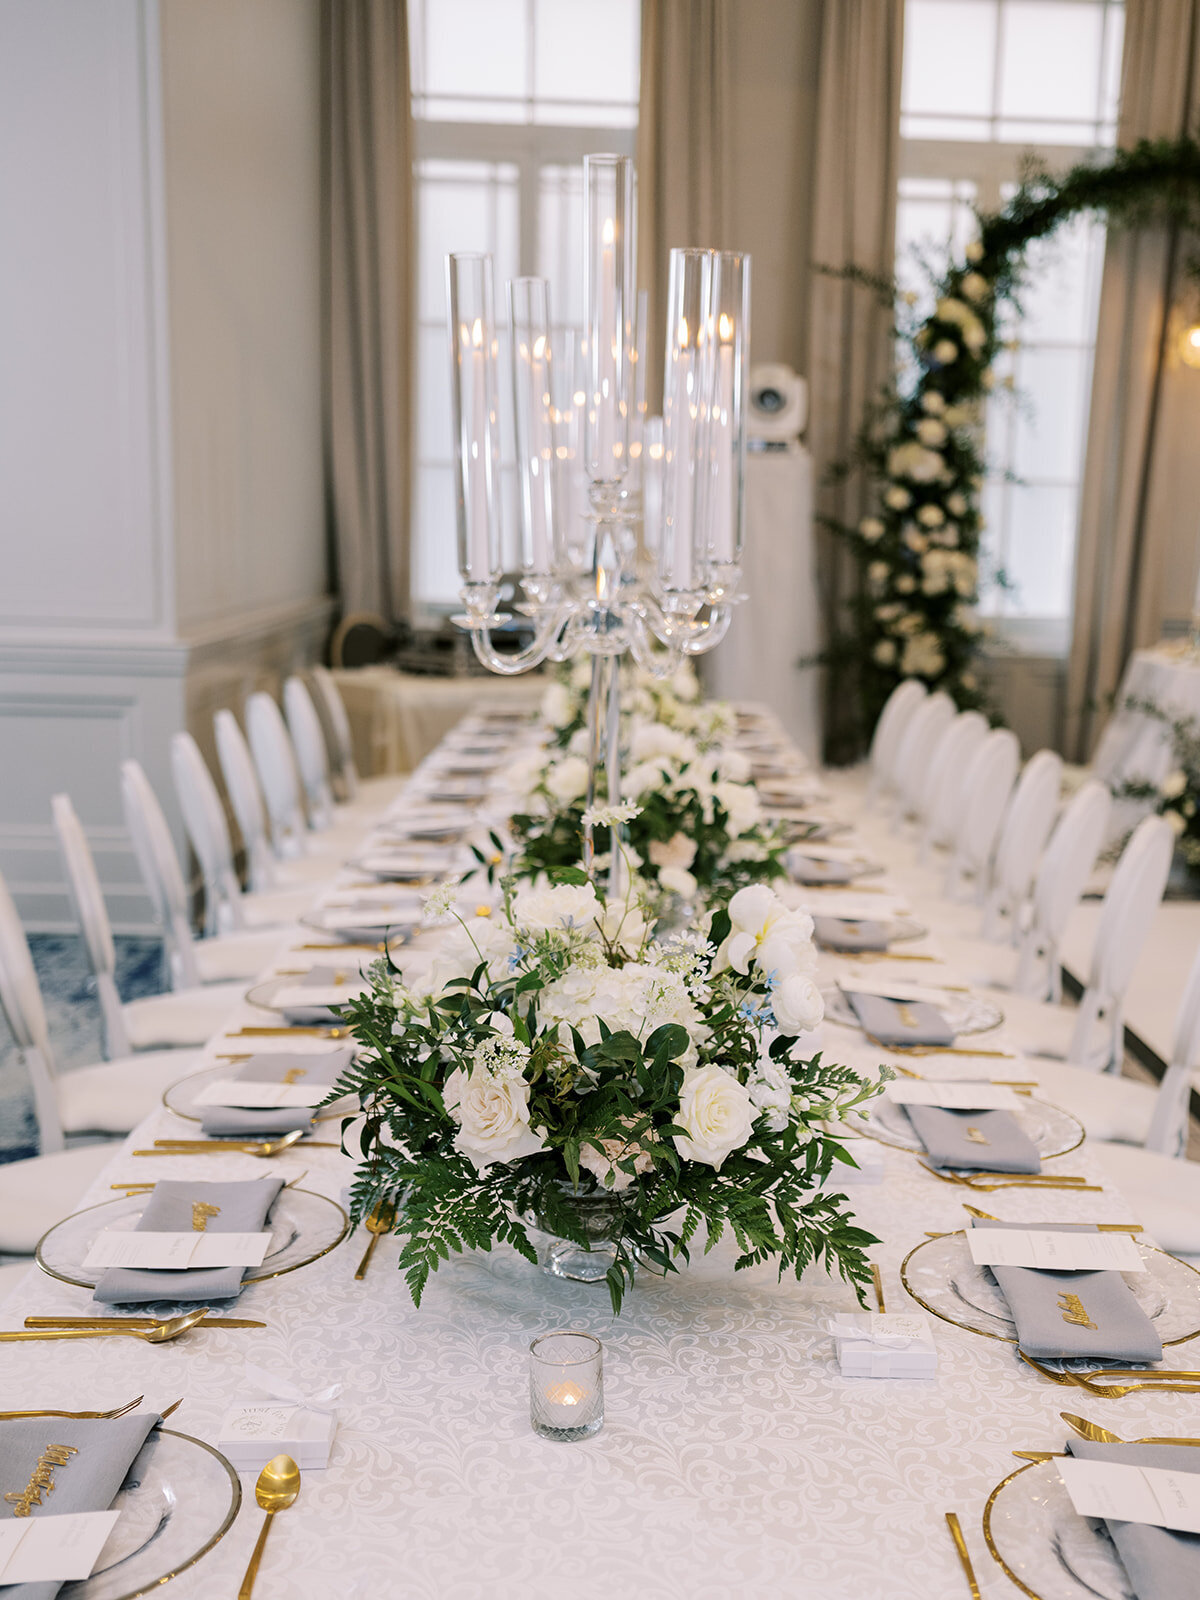 A long, elegantly set dining table with white floral centerpieces, tall candelabras, and neatly arranged place settings sits in a room with large windows and a floral arch in the background, showcasing the meticulous wedding design by a full wedding planner for an exquisite wedding in Canada.